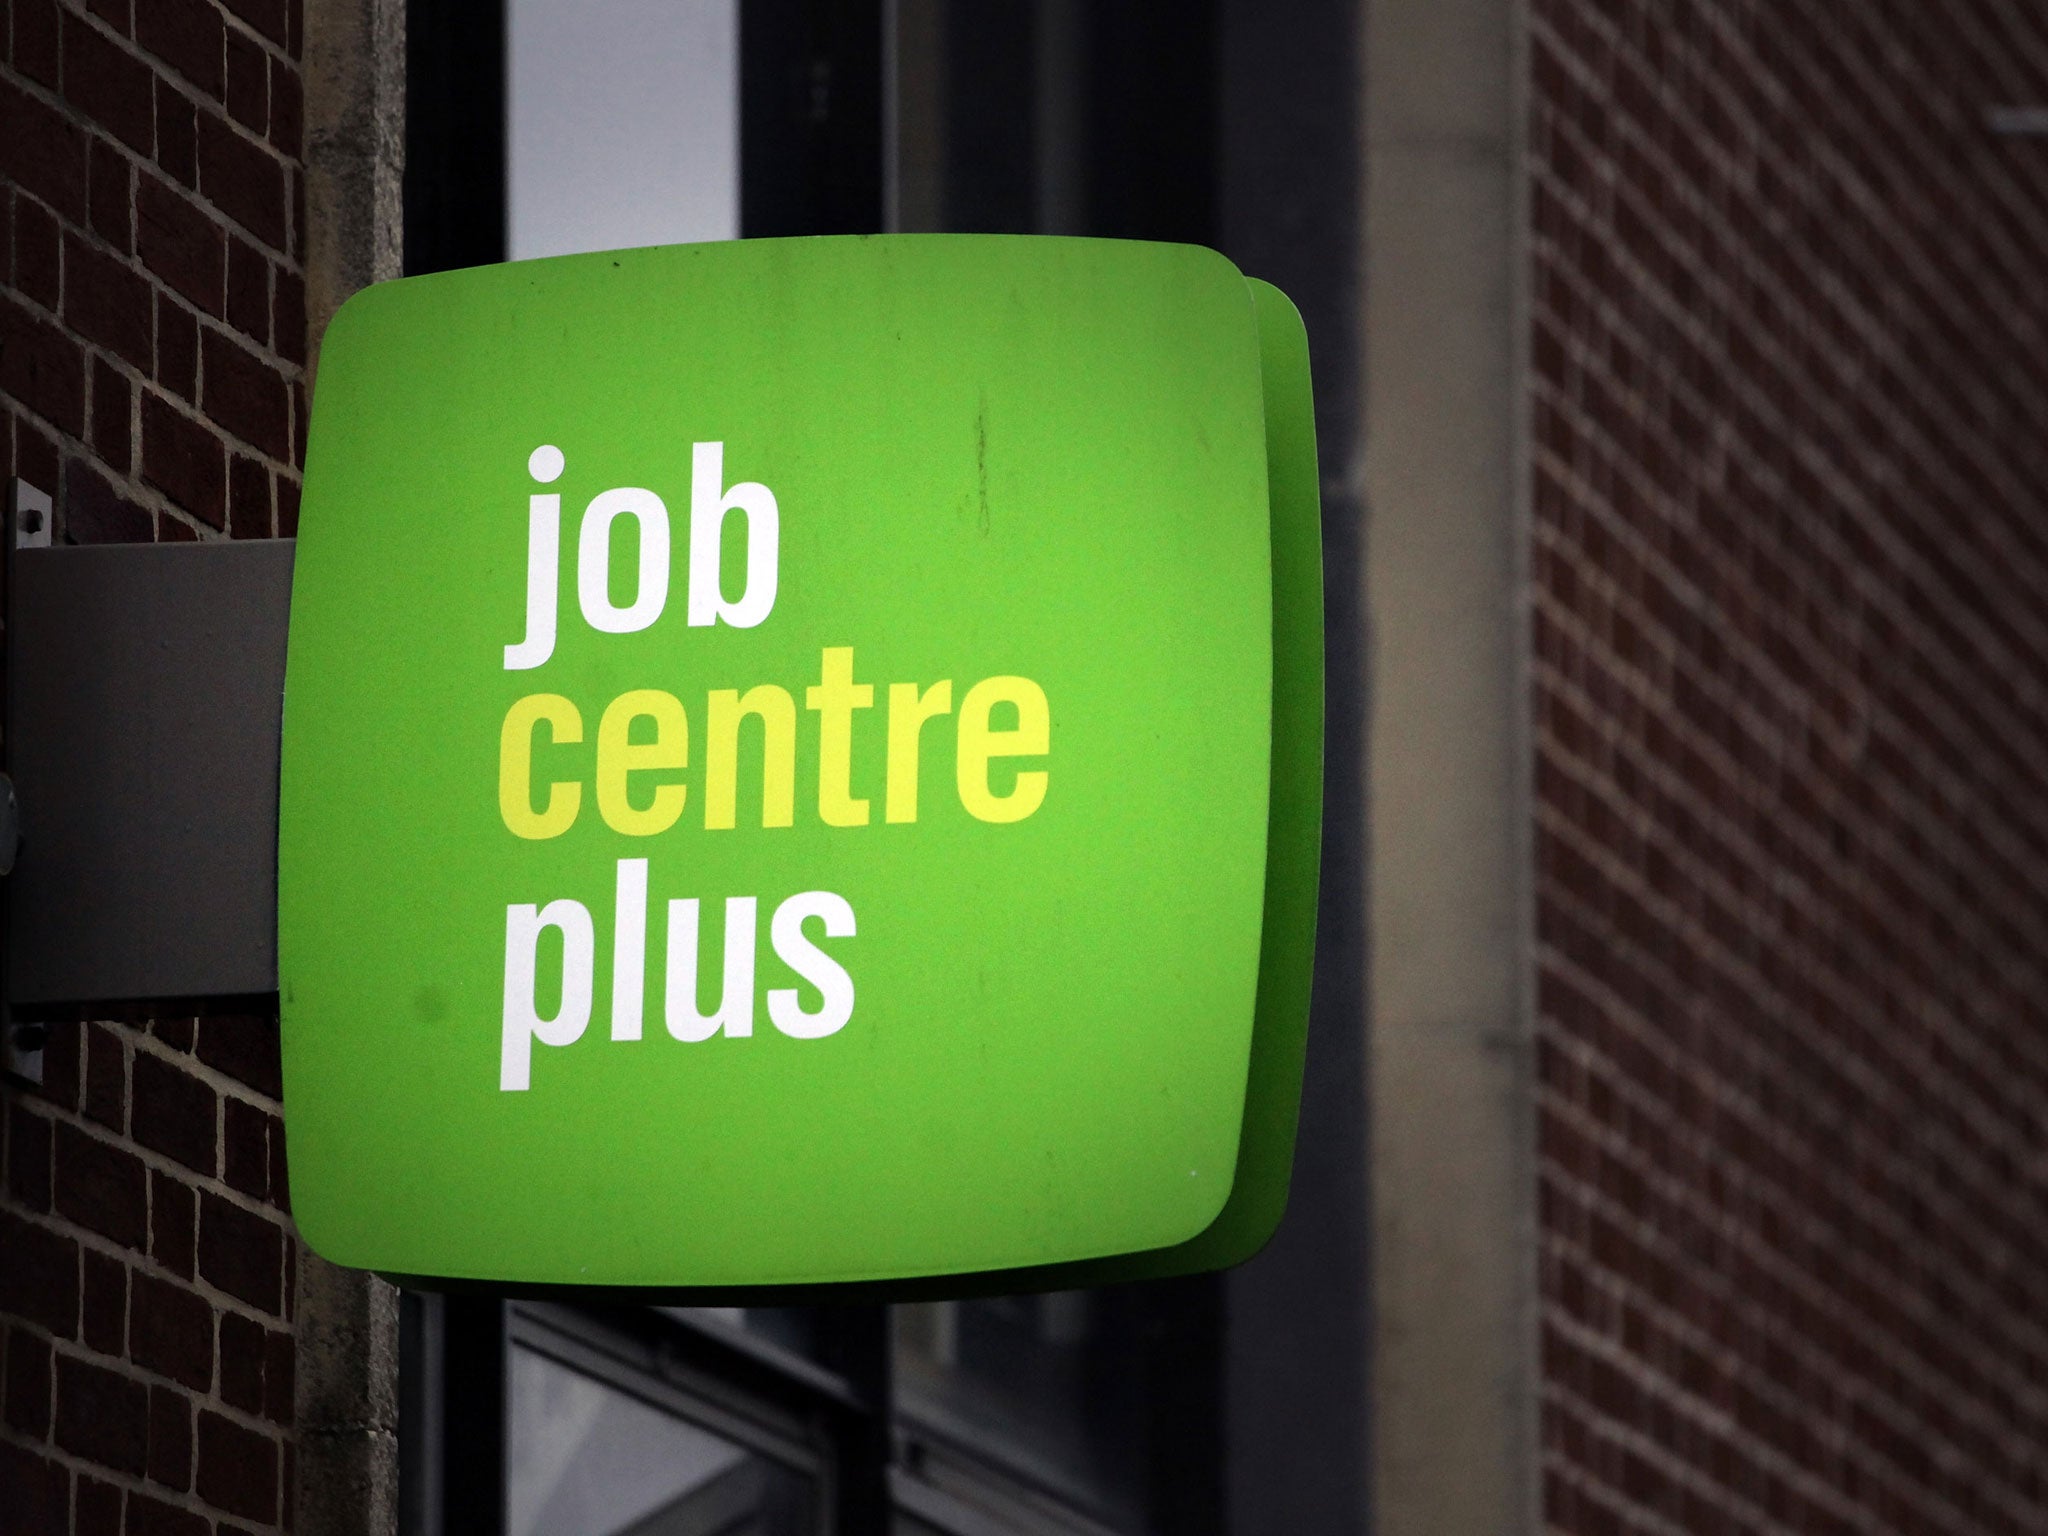 JobCentre Plus staff, who will conduct the interviews, will have a secret list of 100 questions